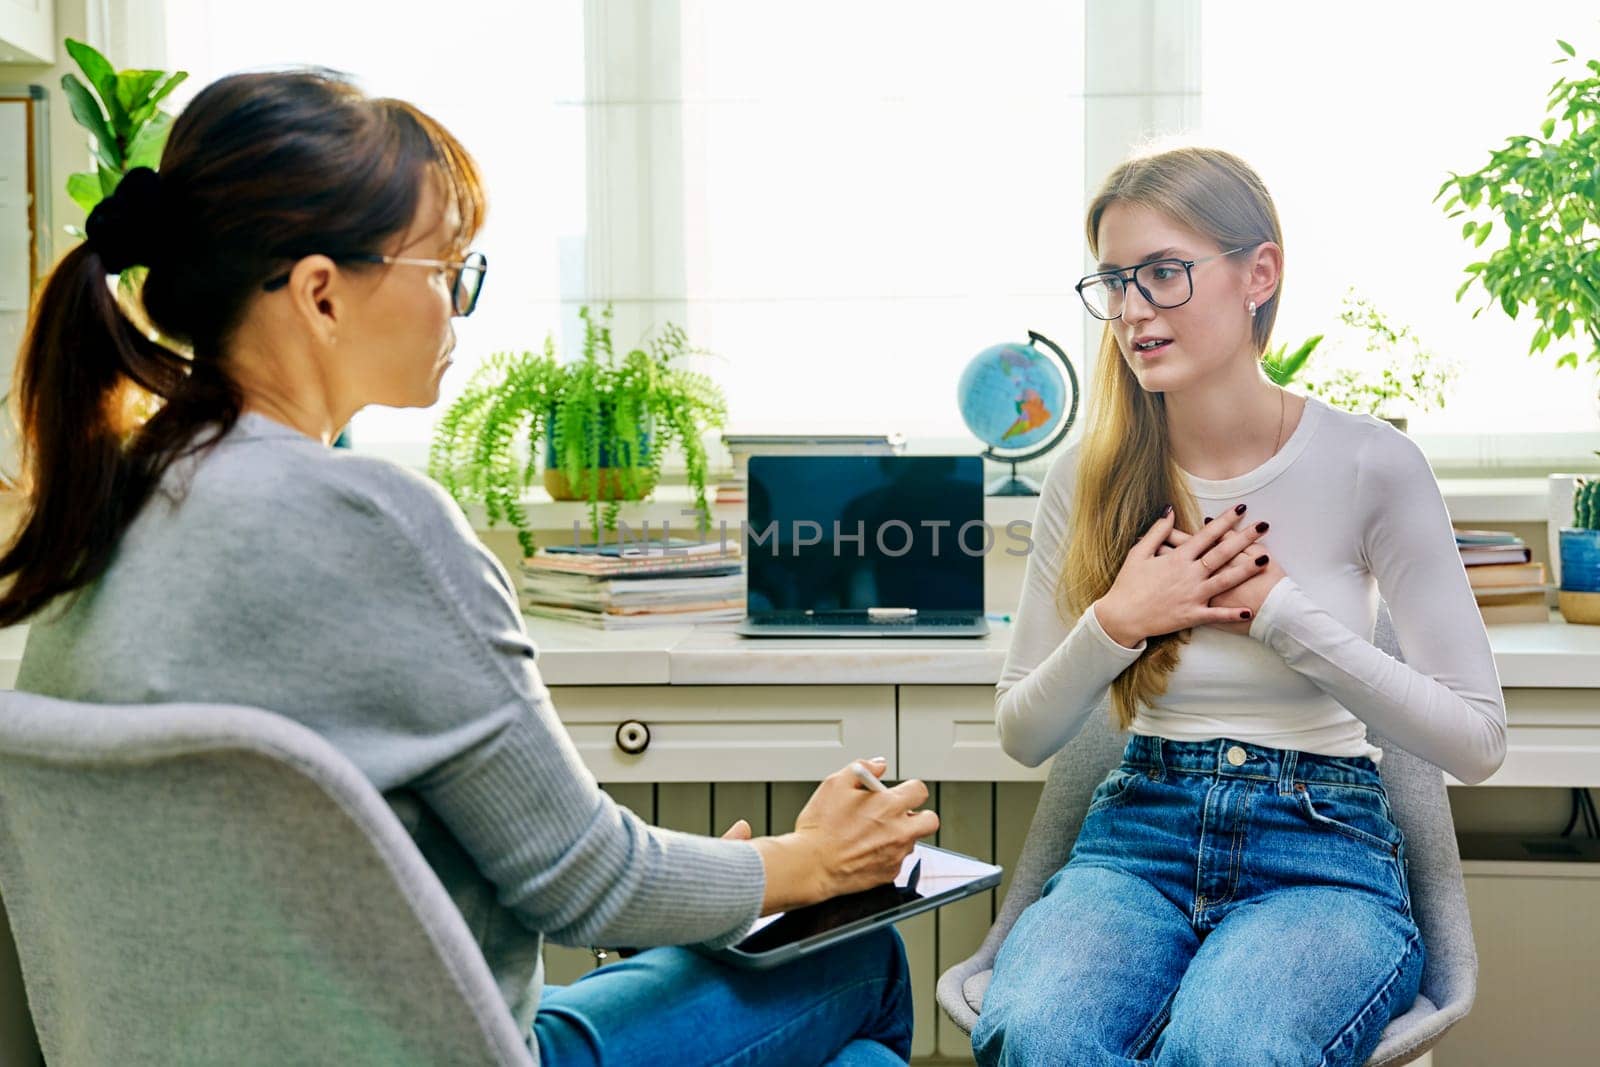 Young female teenager 16, 17 years old talking with counselor psychologist behavior social worker teacher, sitting in chair in office. Psychology psychotherapy therapy mental health adolescence youth